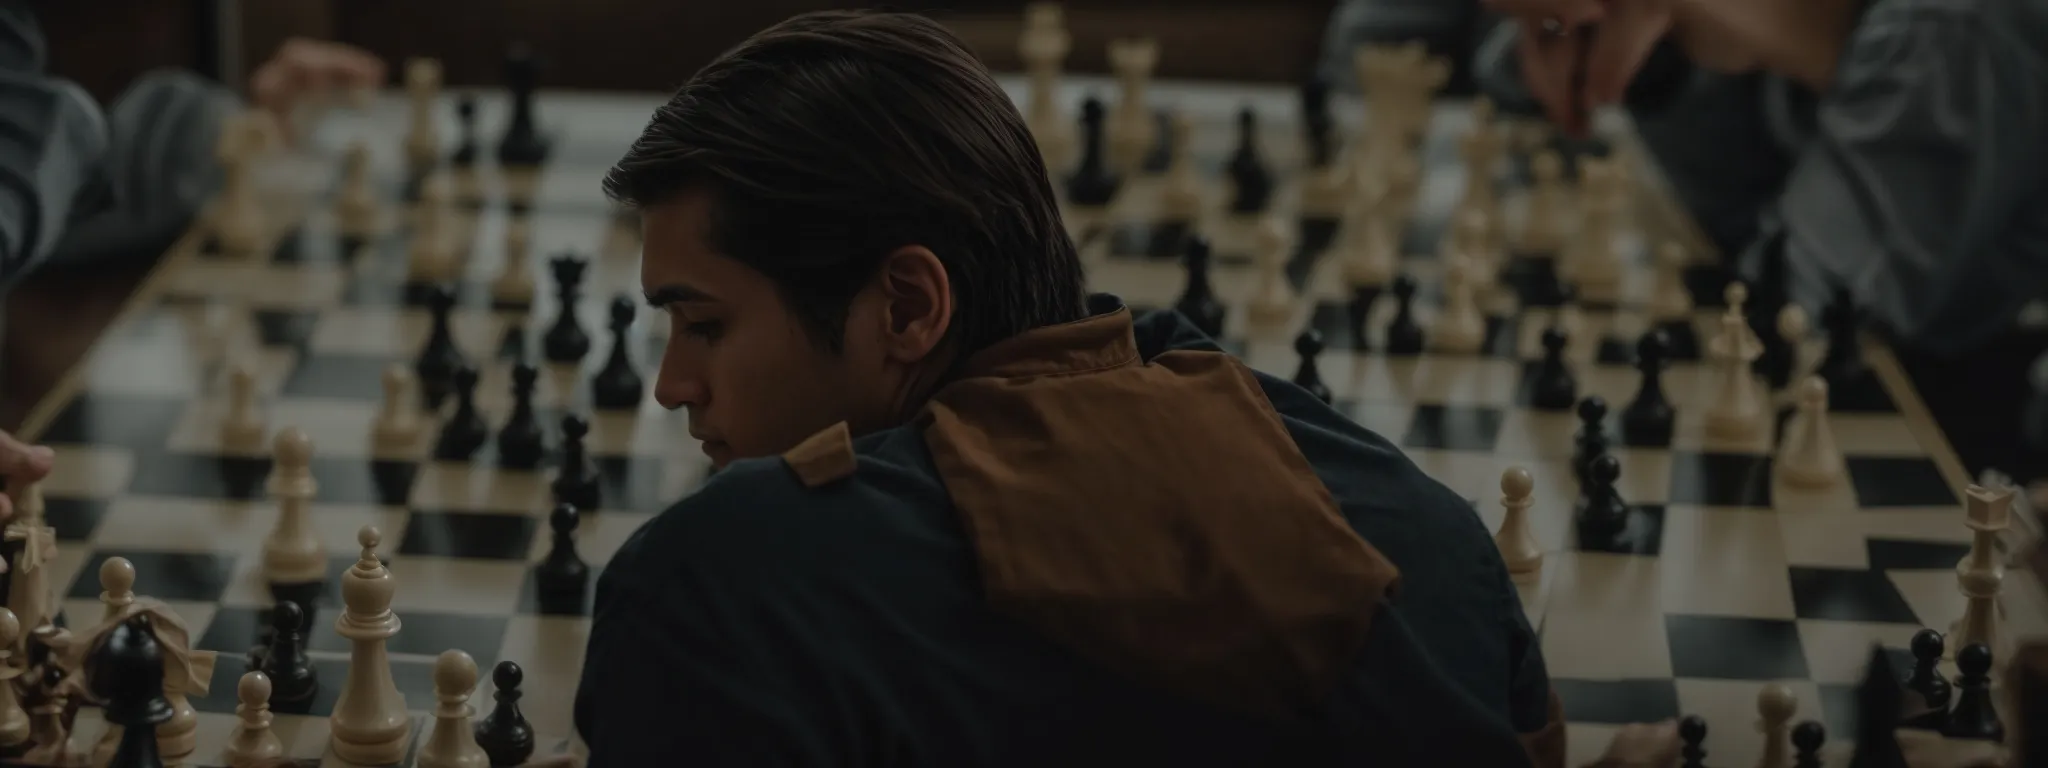 a chess player contemplates a strategic move on the board, symbolizing the tactical approach to backlink strategies in seo.